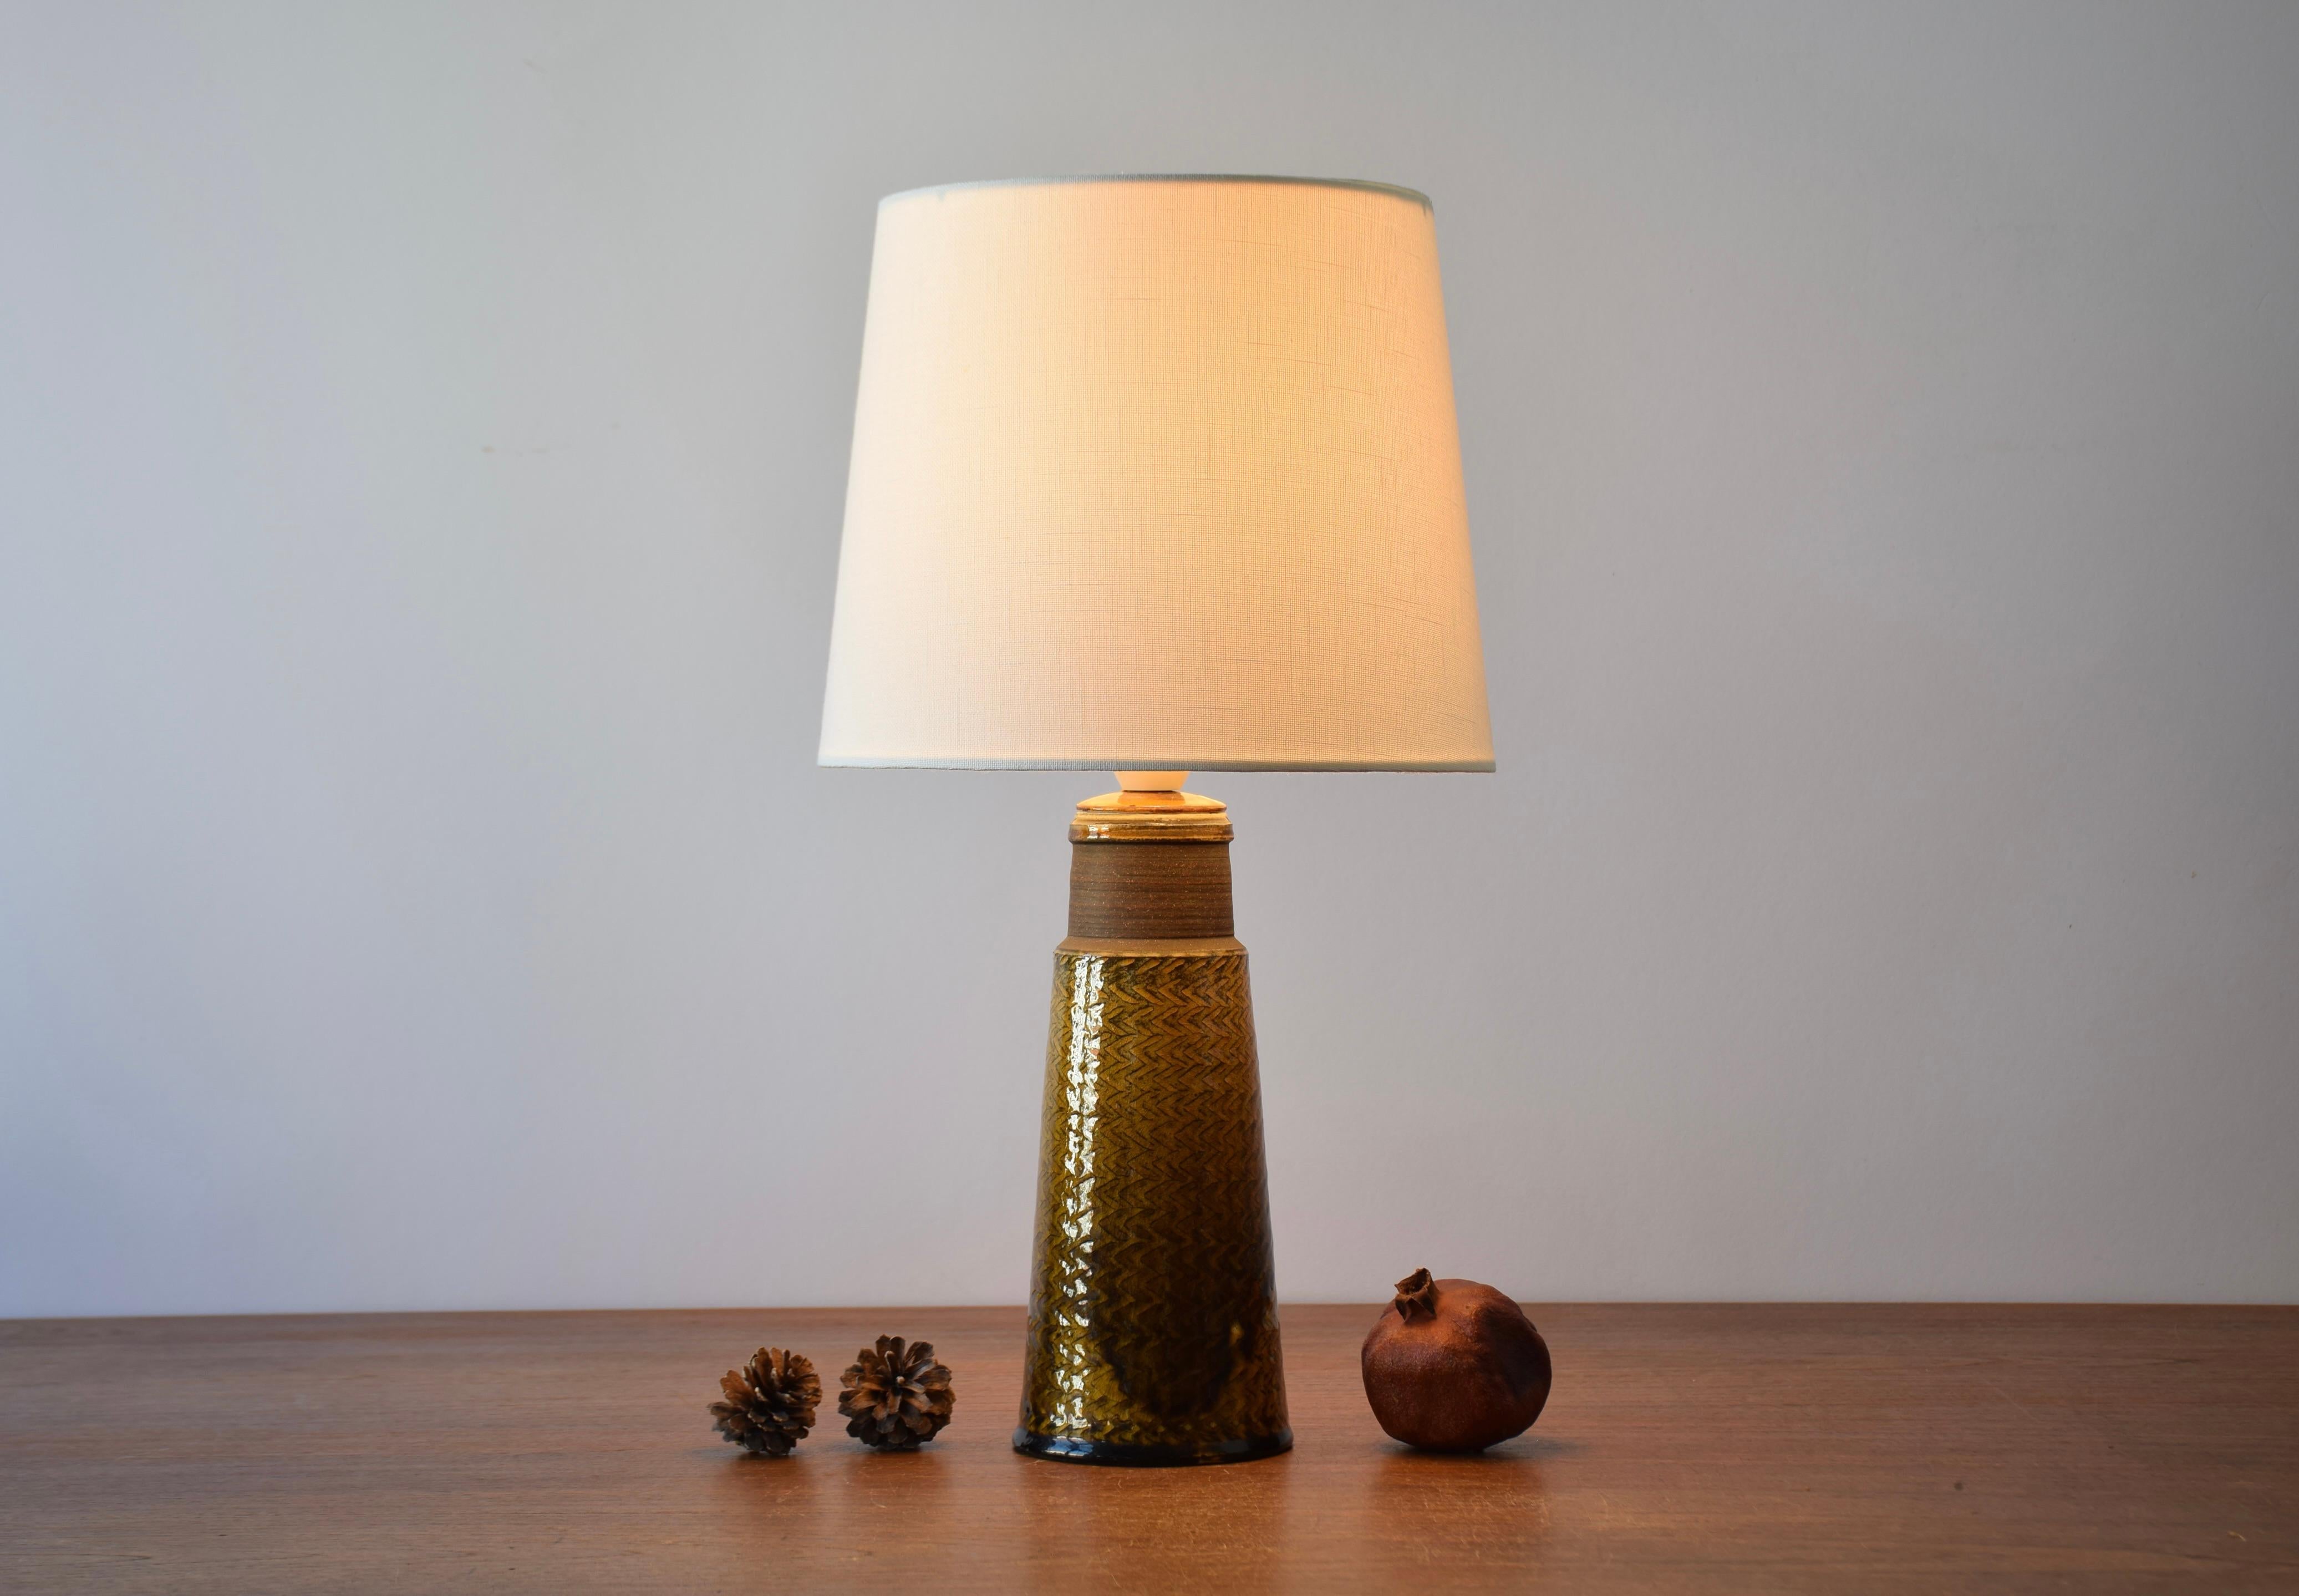 Table lamp designed by Nils Kähler and made by Herman August Kähler´s ceramic workshop in Denmark in the 1960s.

The lamp base has an incised zigzag pattern and the glossy glaze is amber / curry colored. A broad band at the top is left smooth and